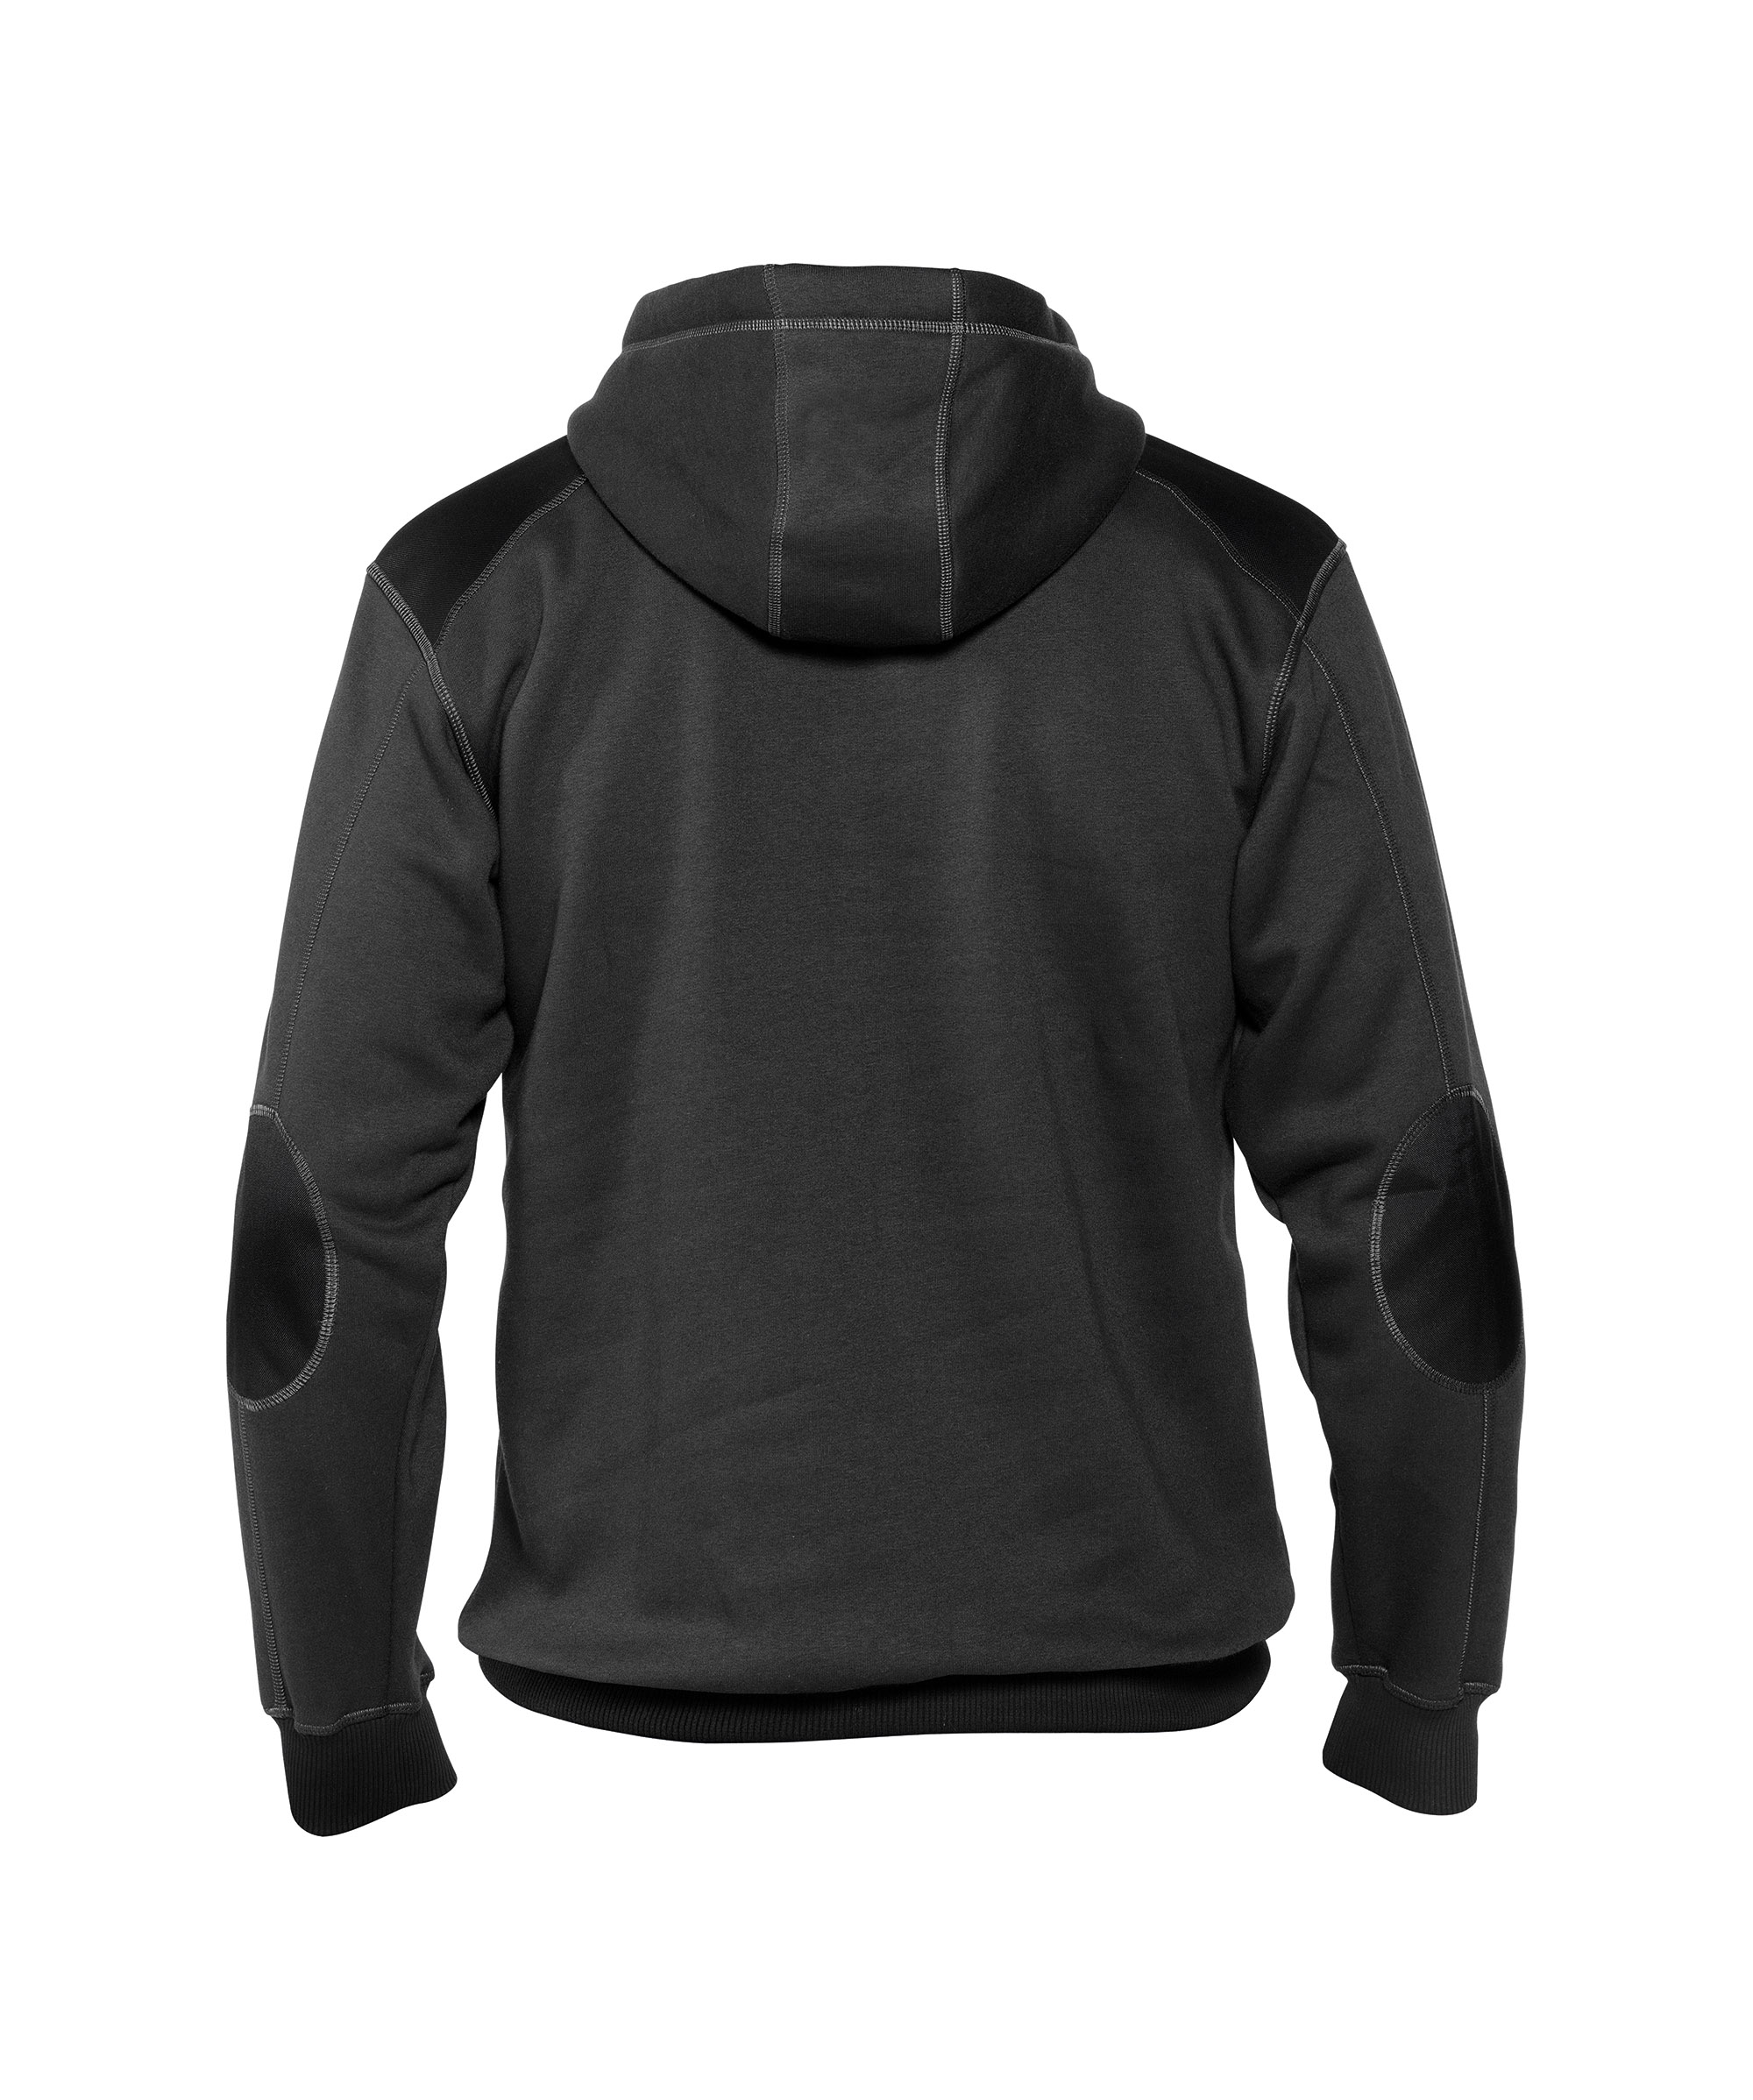 indy_hooded-sweatshirt-reinforced-with-canvas_anthracite-grey-black_back.jpg